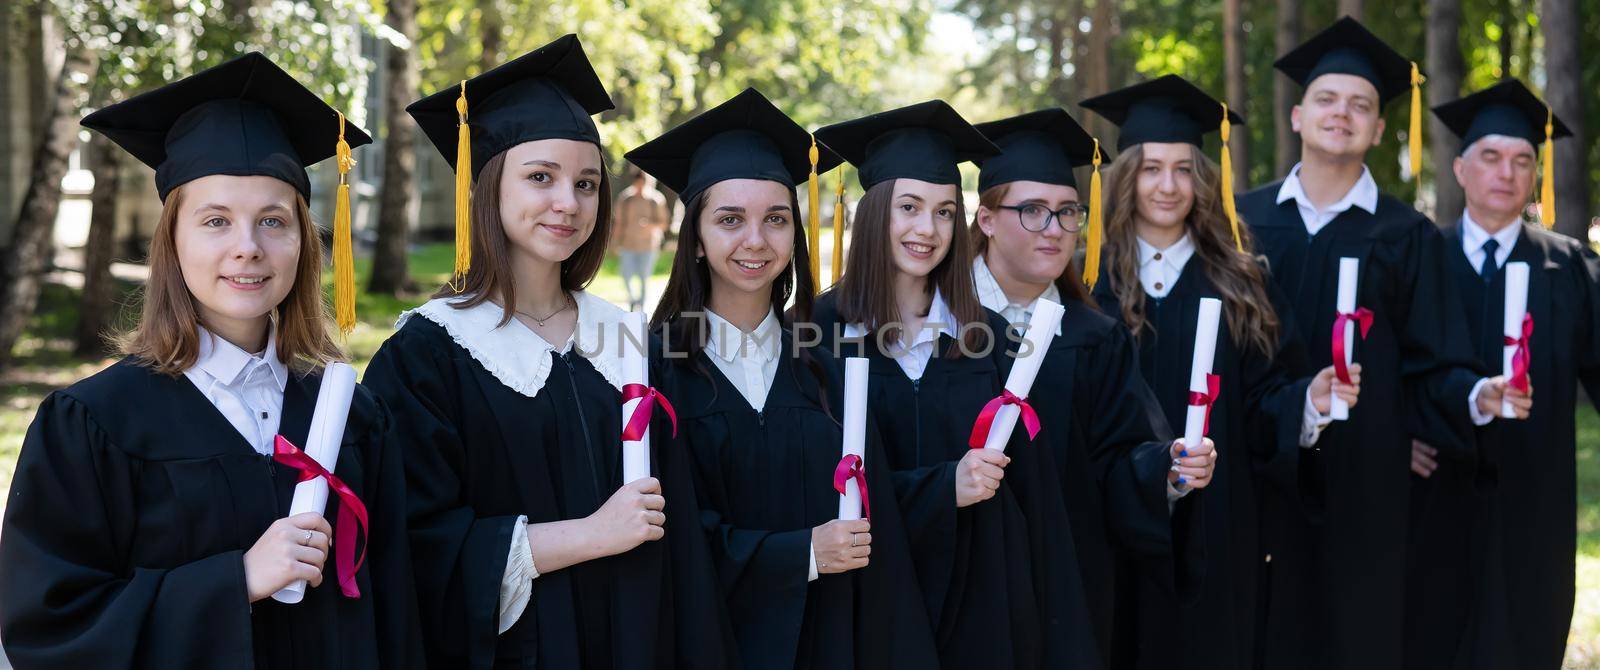 Row of young people in graduation gowns outdoors. Age student. Widescreen